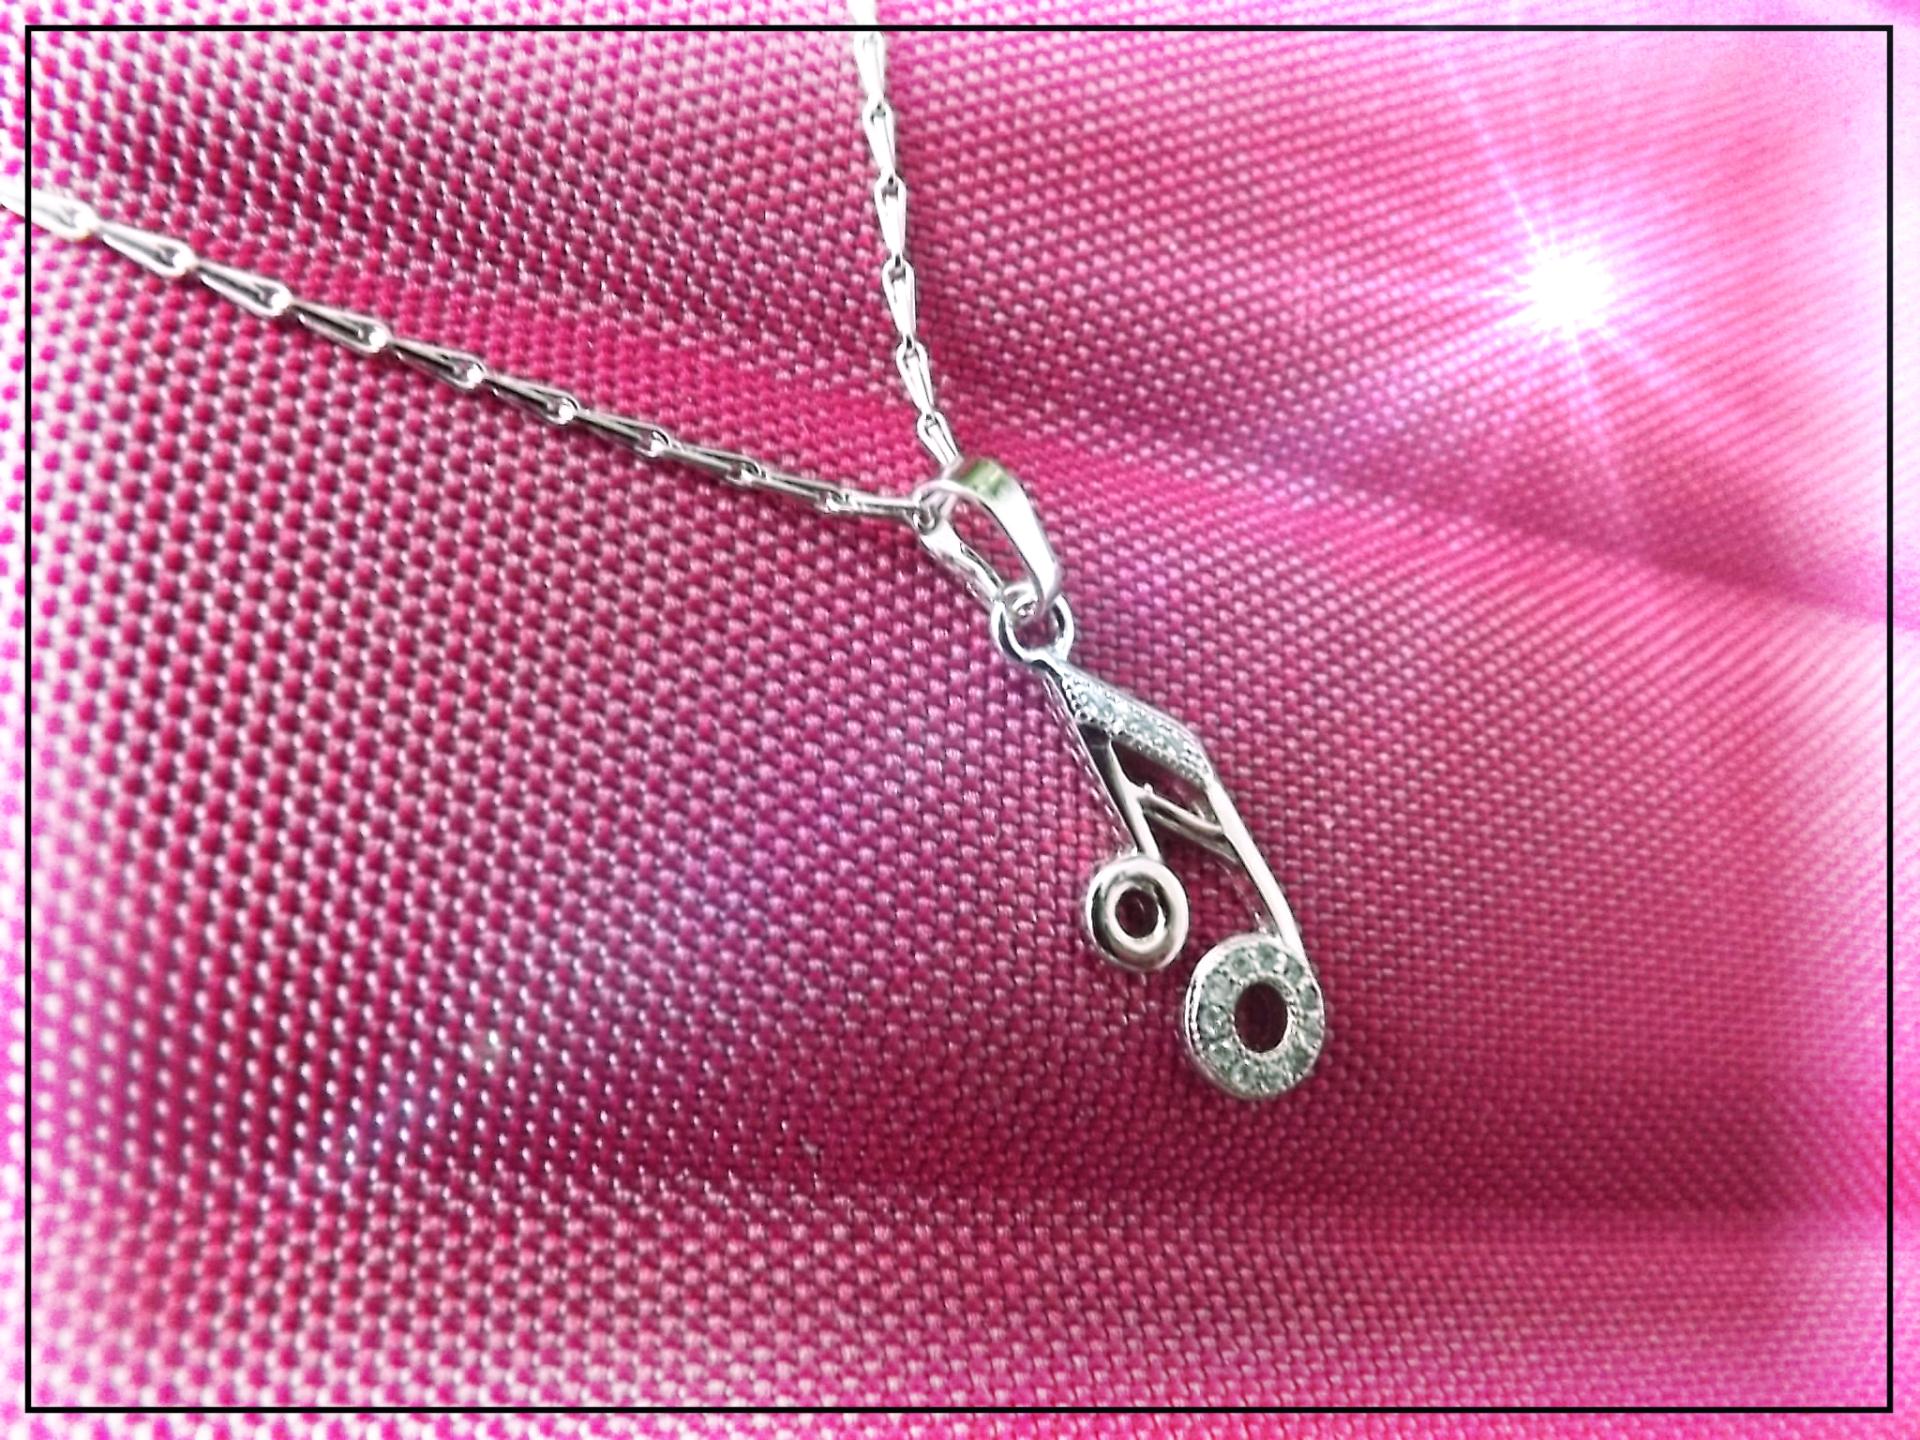 Music Note Charm Necklace with Crystal Stones